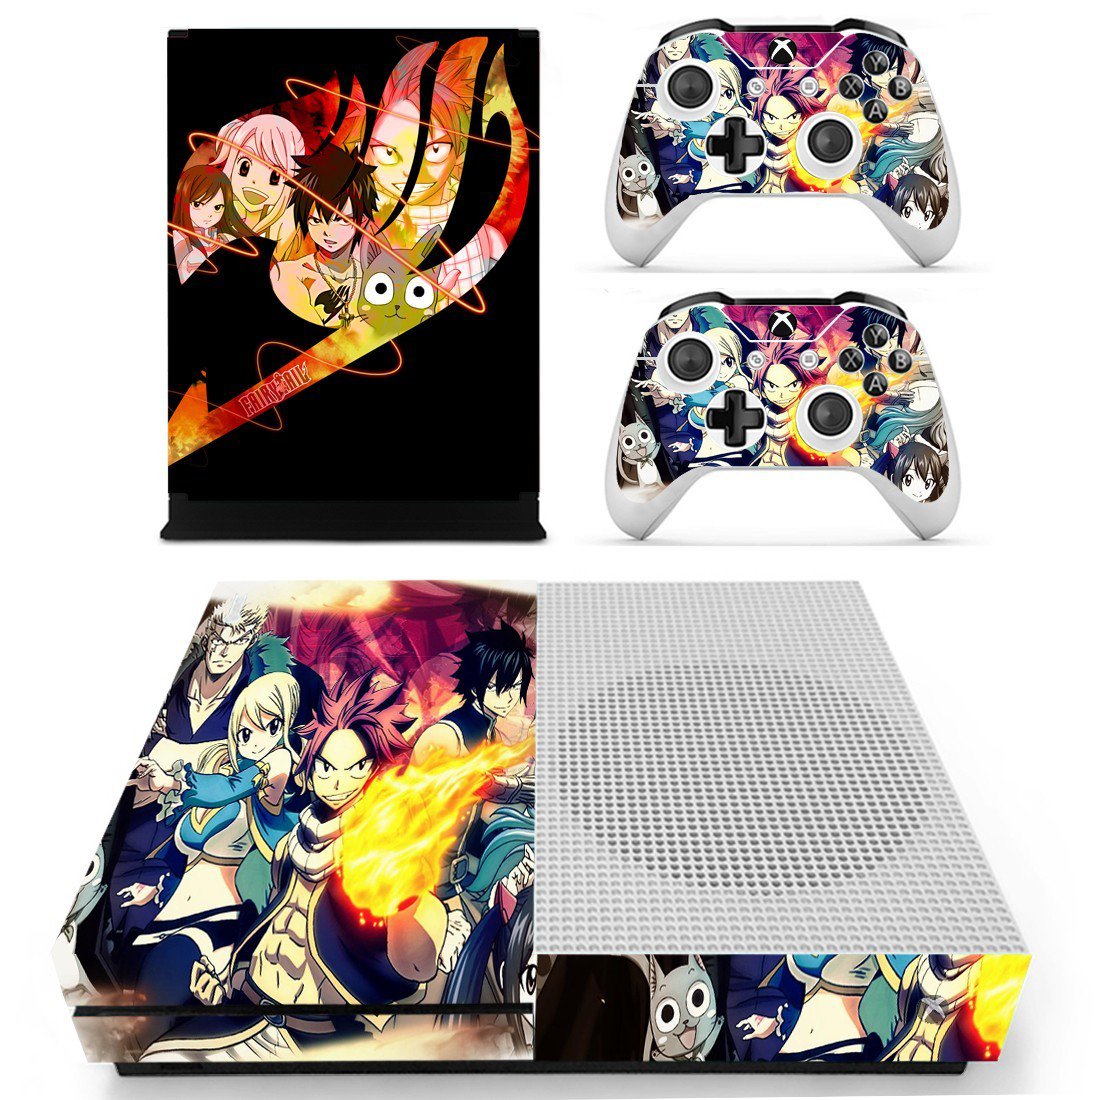 Xbox One S And Controllers Skin Sticker - Fairy Tail